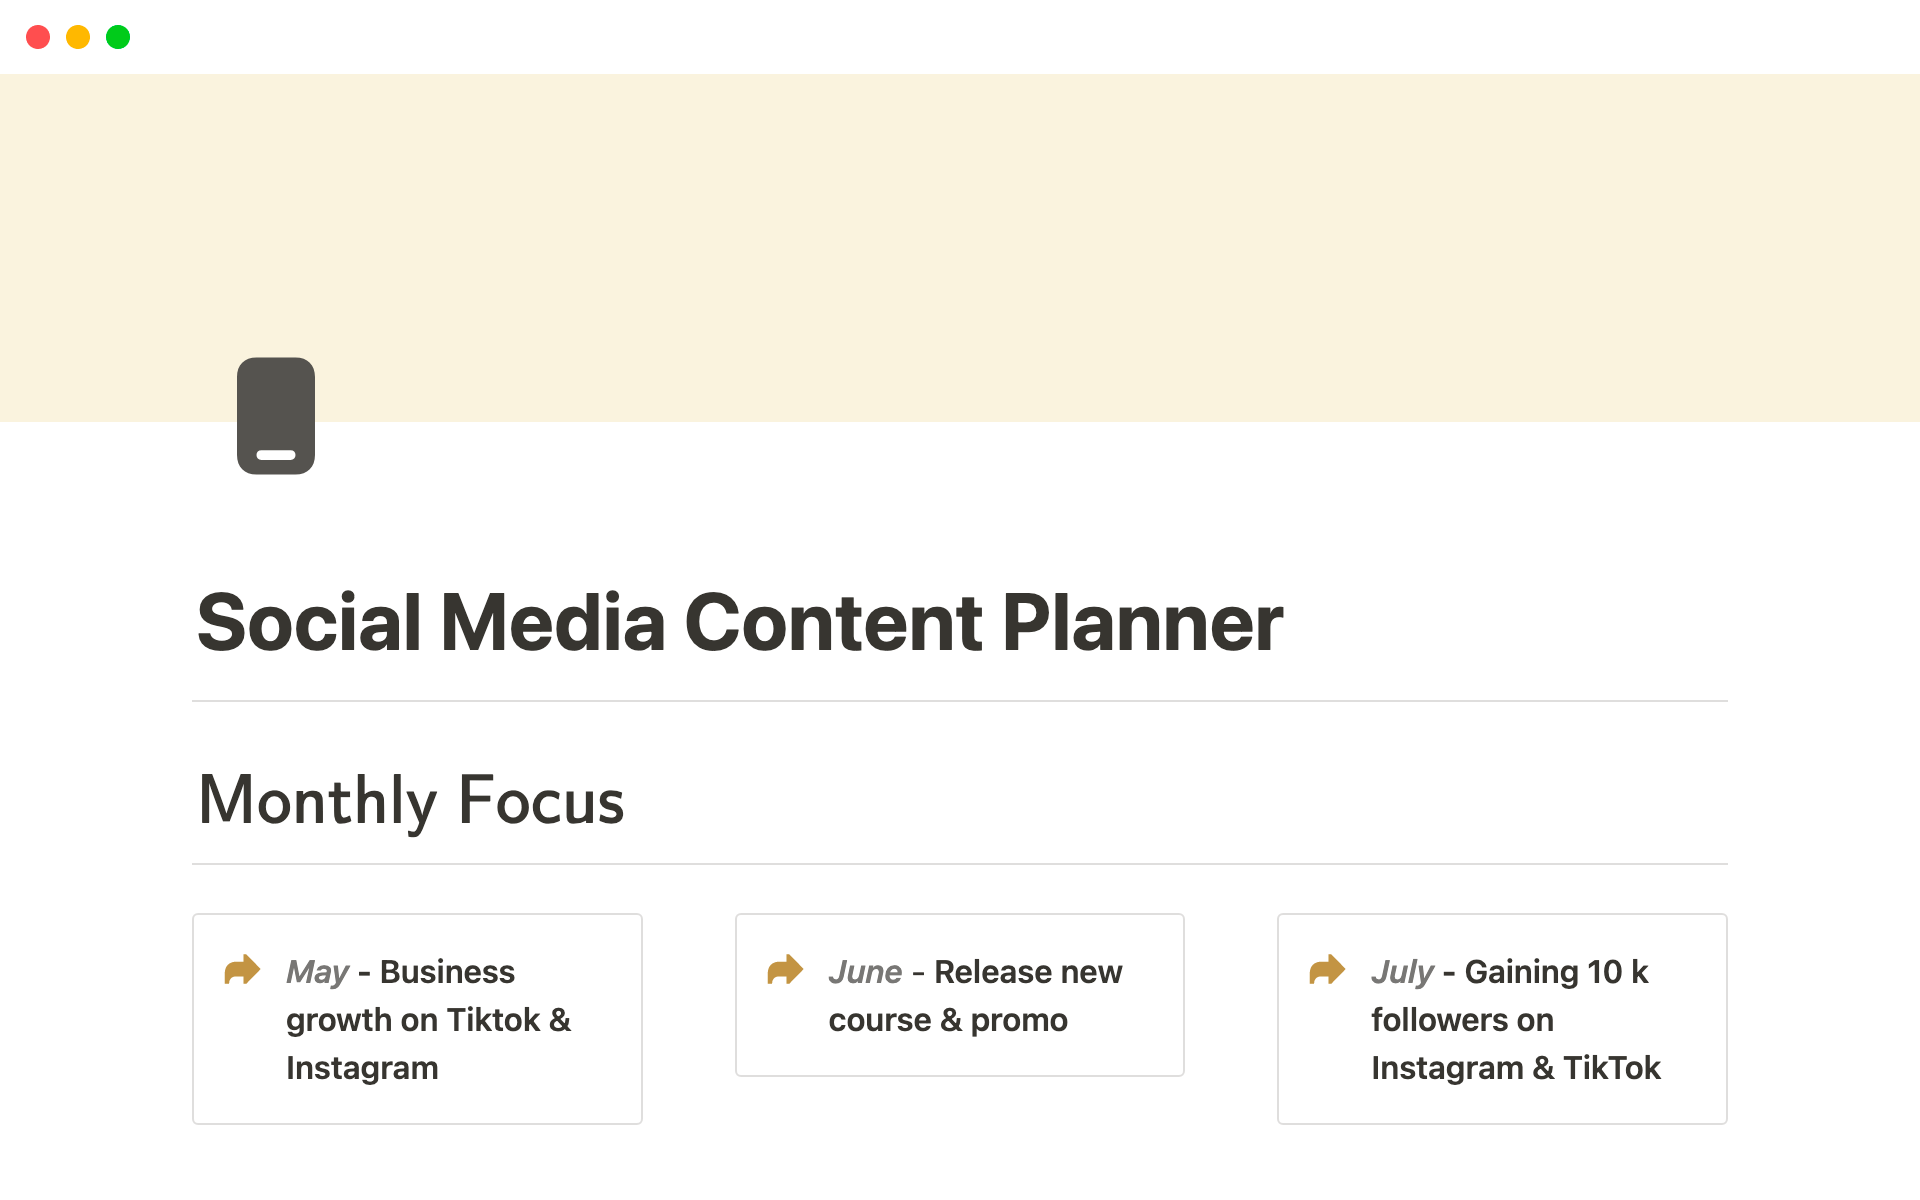 With monthly focuses, goals, demographics, content pillars, content calendar, idea bank and individual social platform strategies, you'll have everything you need to plan and schedule engagement.